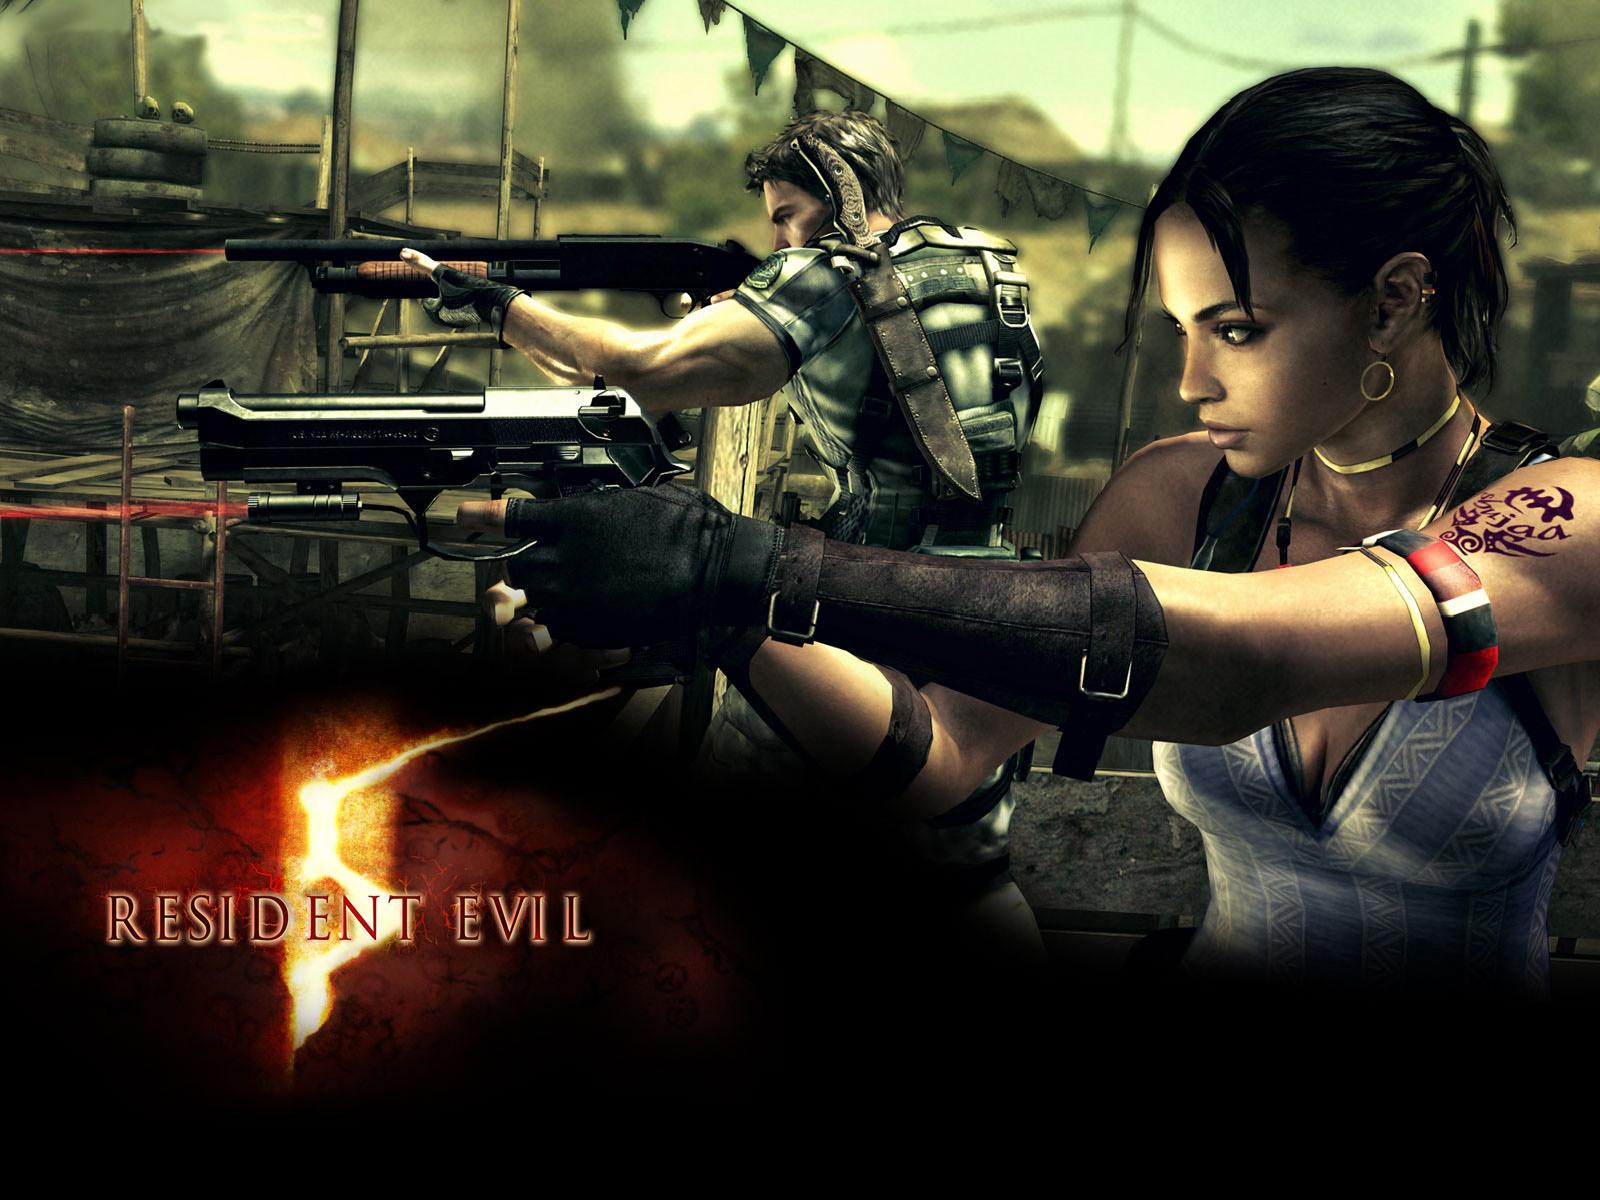 Download High quality Resident Evil wallpaper / Games / 1600x1200